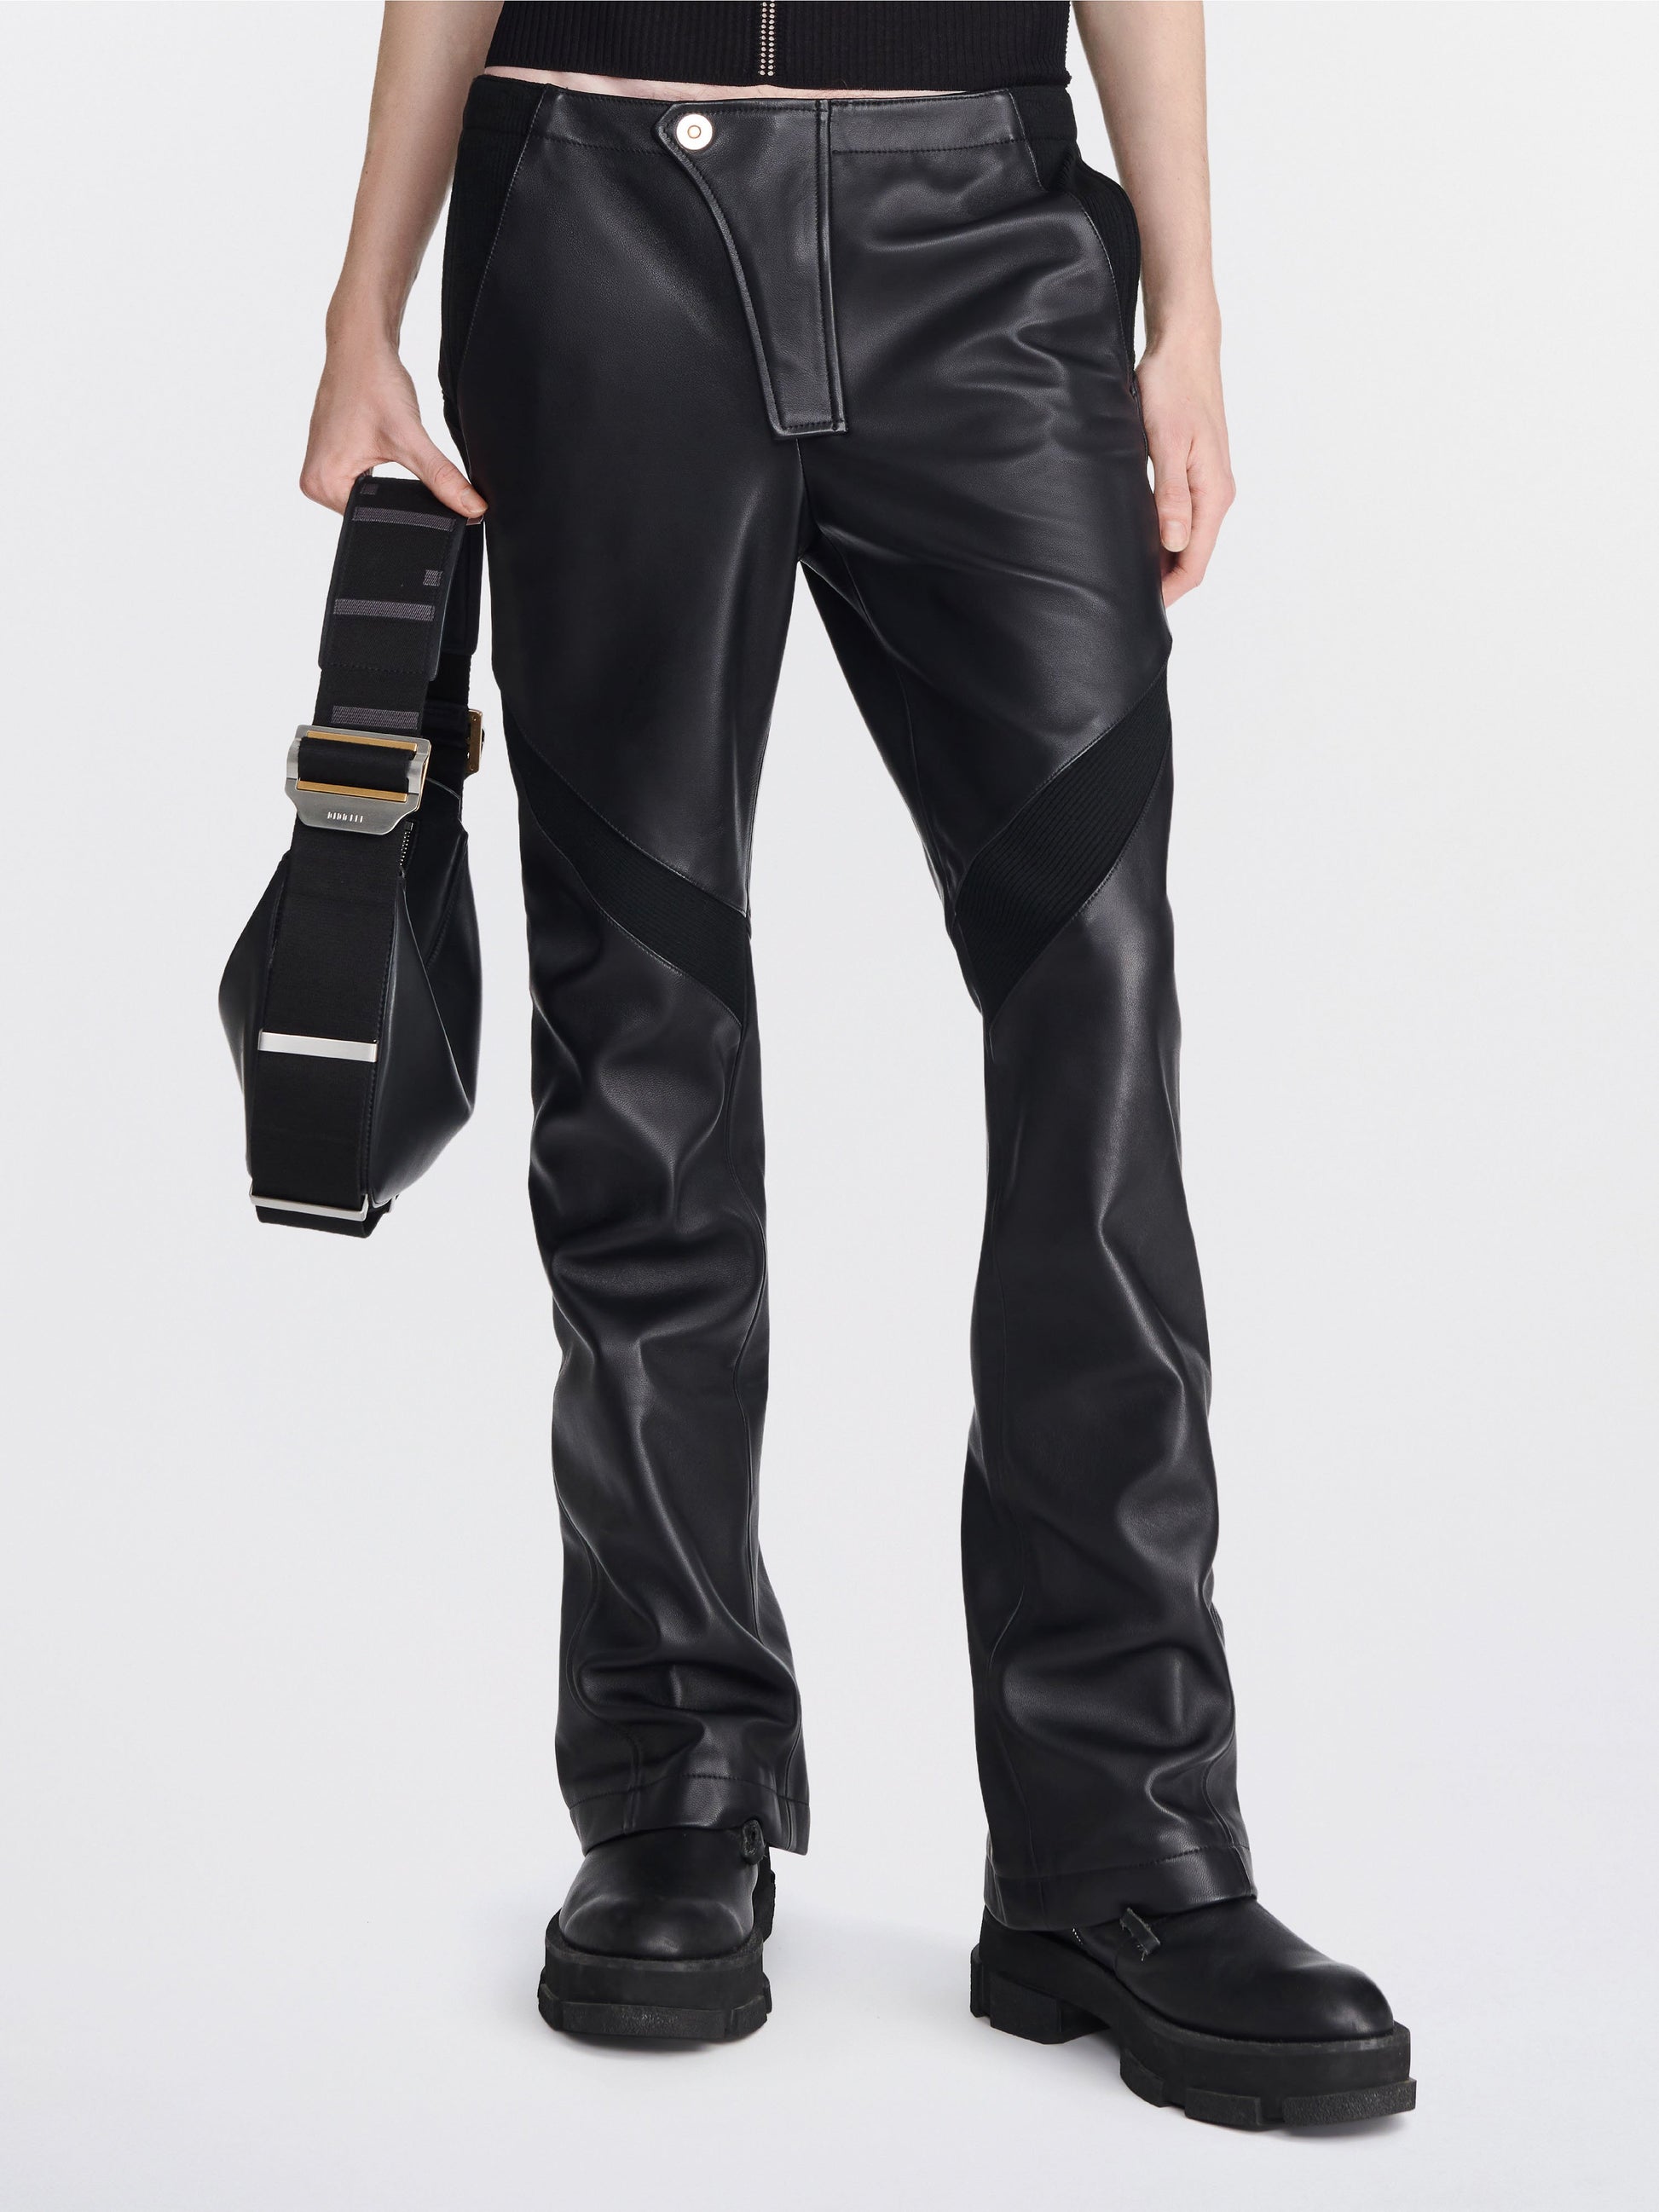 DION LEE, Leather Moto Pant